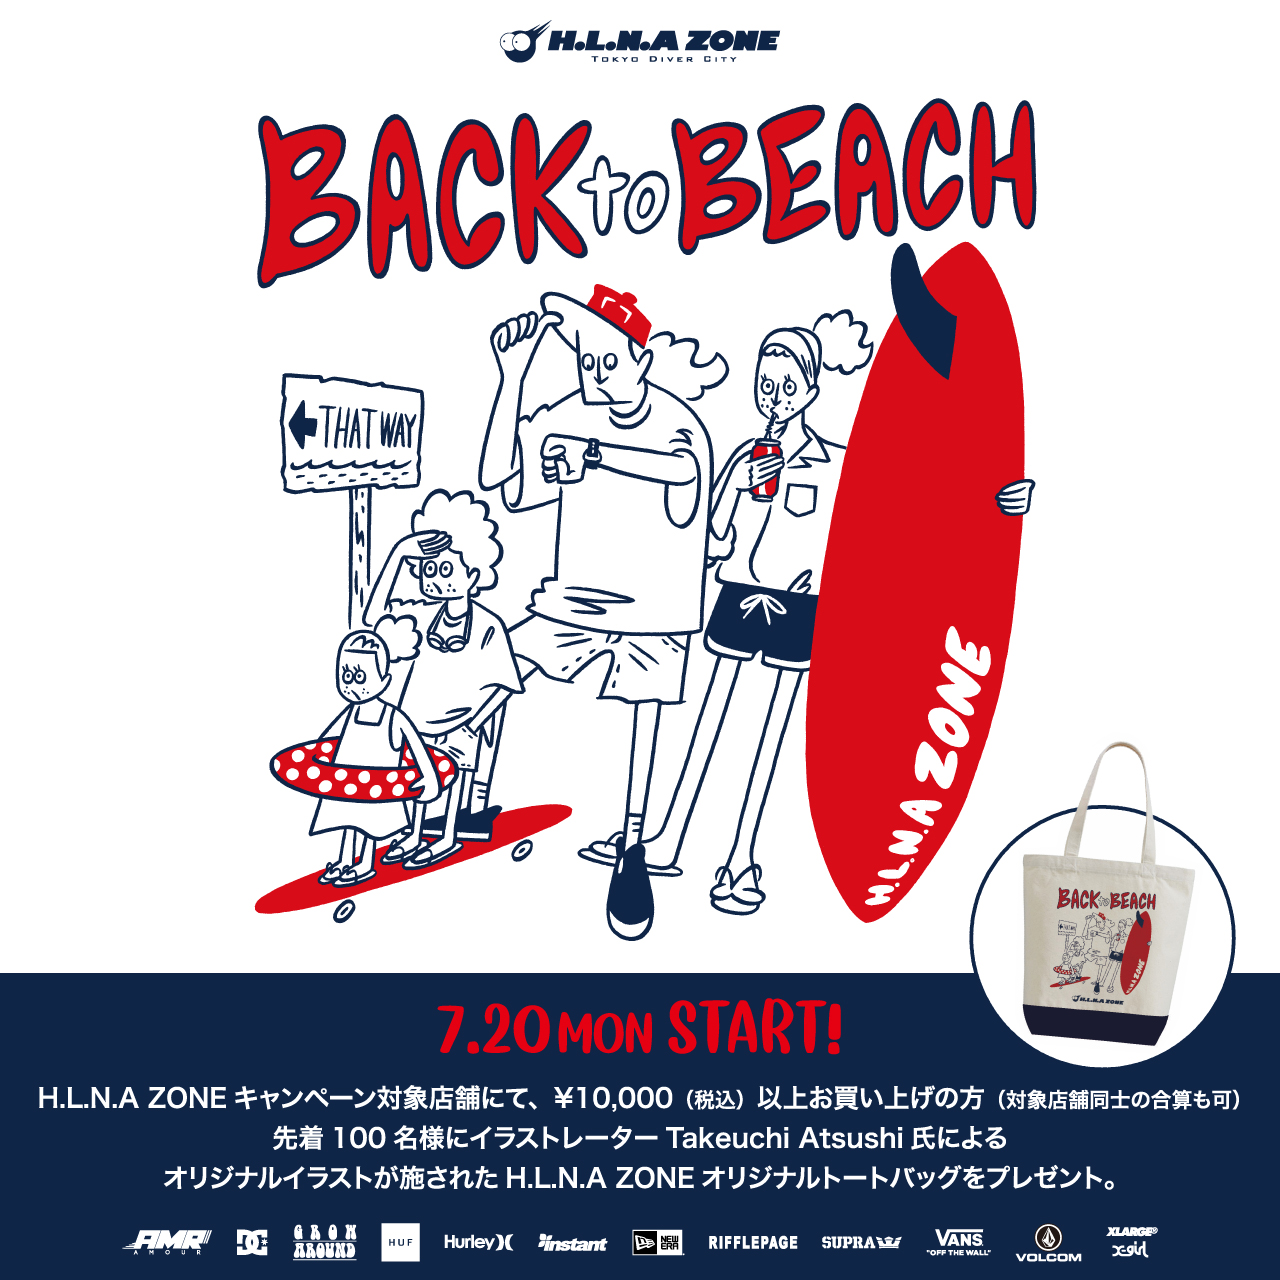 ZONE-Back-to-beach-campaign_SNS